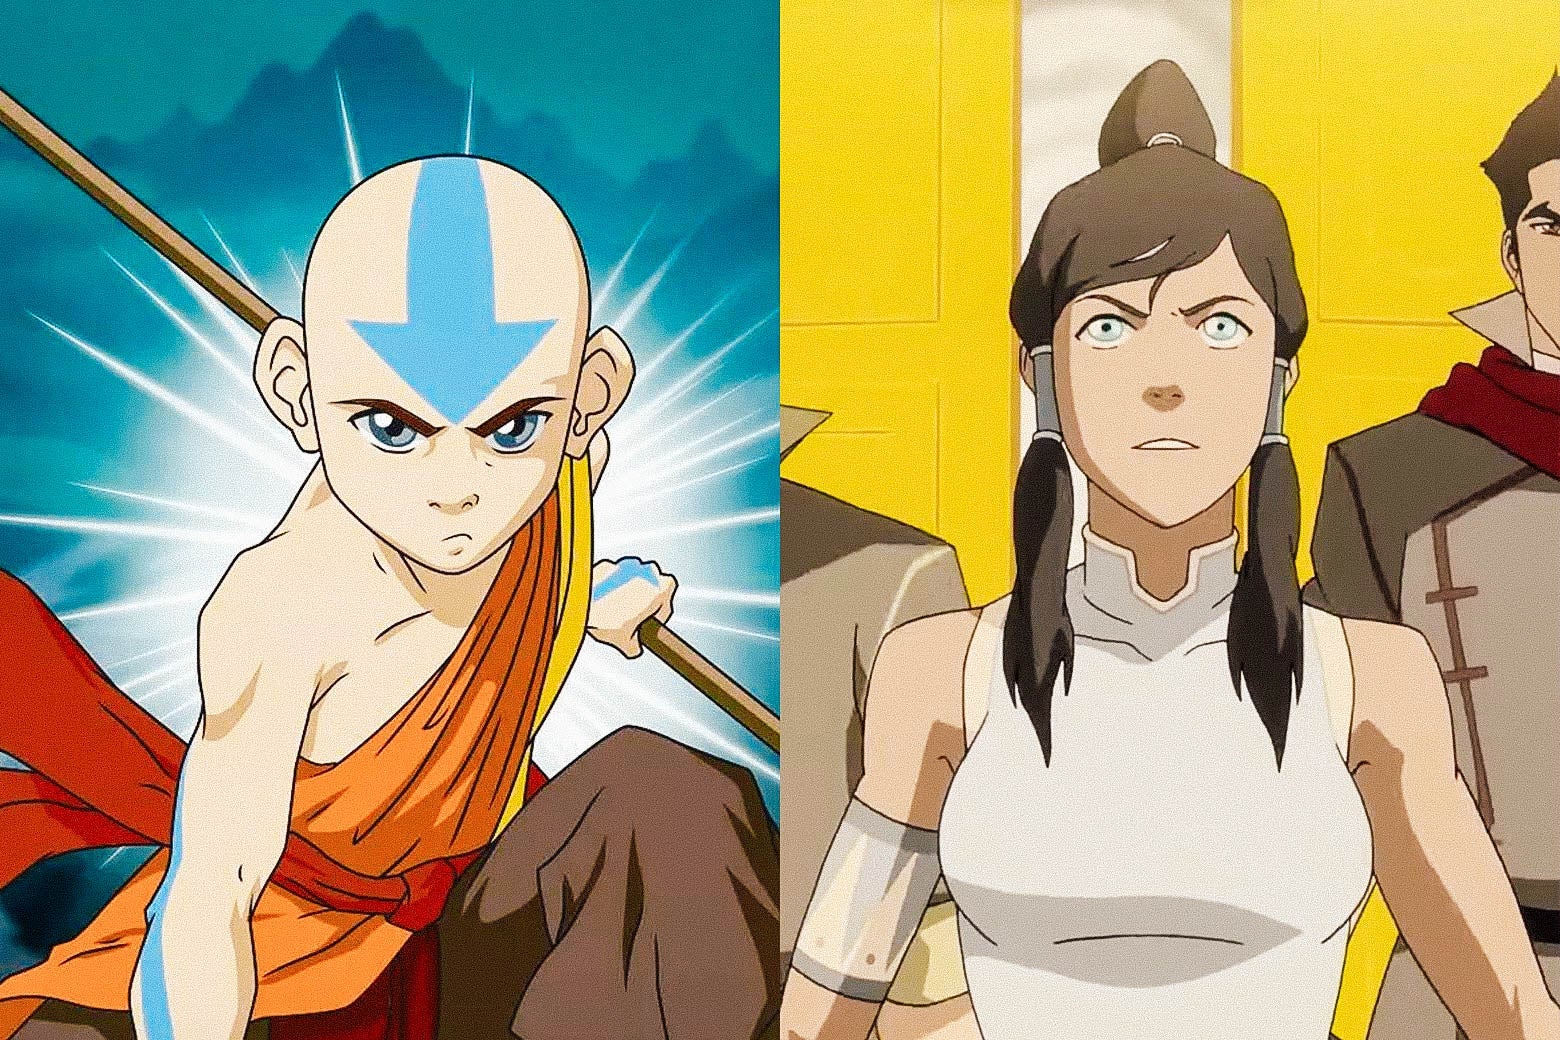 Avatar The Last Airbender creator says hed fix a lot about the show   EWcom